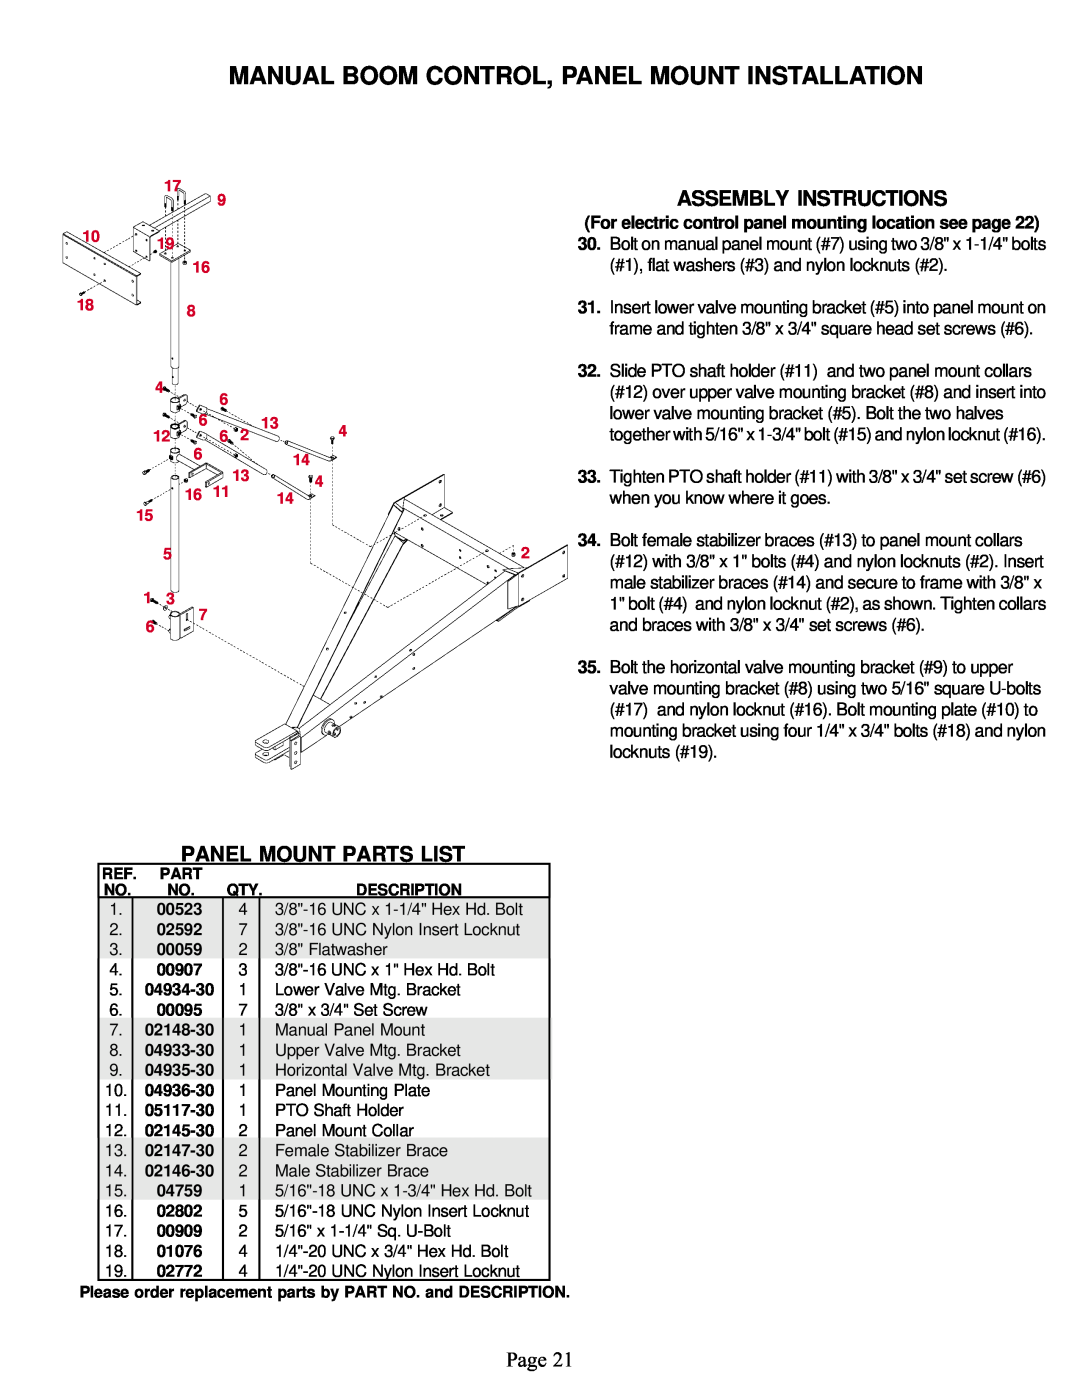 Demco Sprayer Manual Boom Control, Panel Mount Installation, Page, For electric control panel mounting location see page 